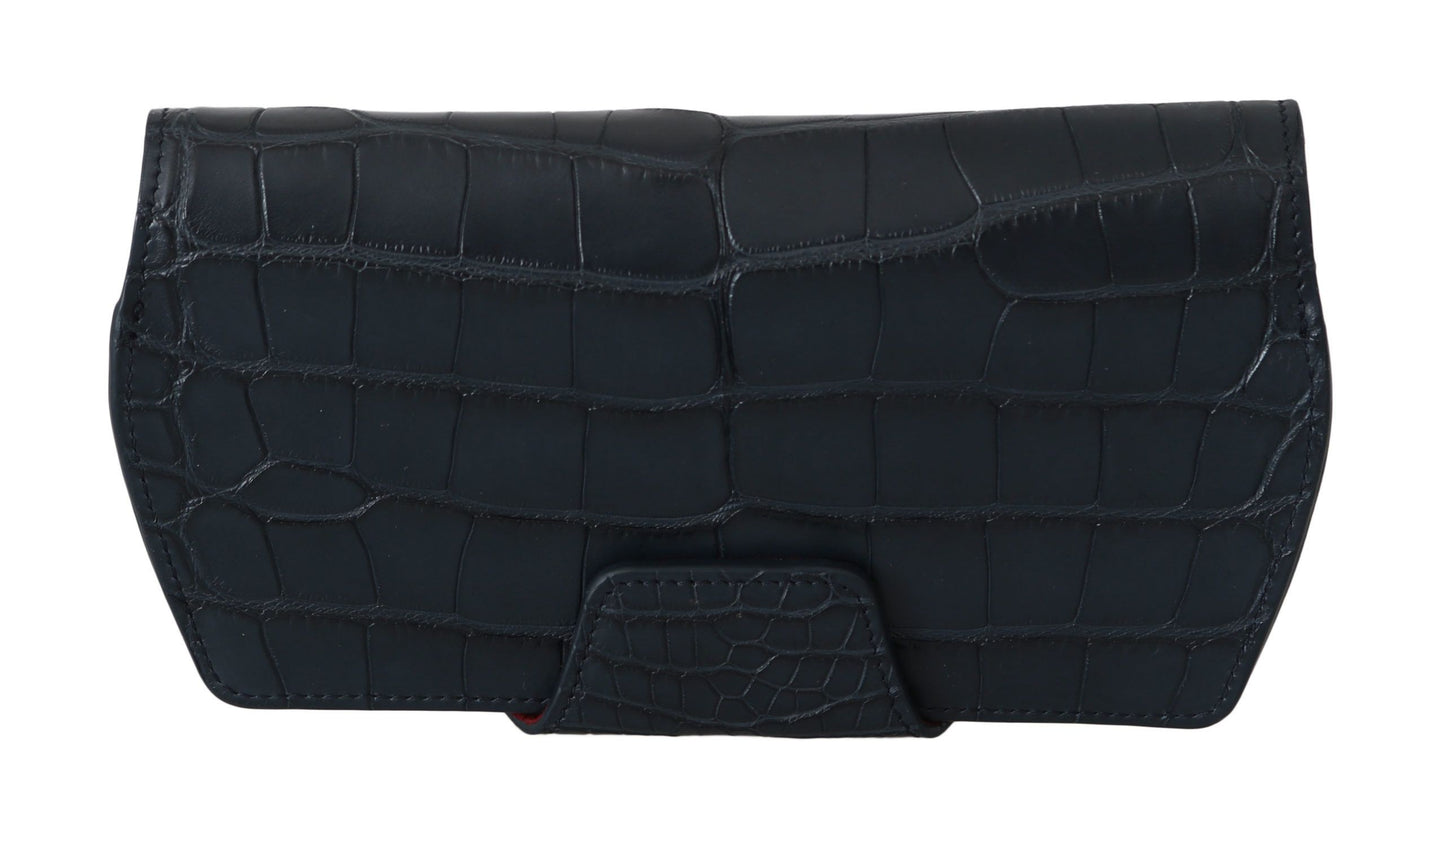 Blue Crocodile Eyewear Sunglasses Case Cover Pouch - Designed by Dolce & Gabbana Available to Buy at a Discounted Price on Moon Behind The Hill Online Designer Discount Store